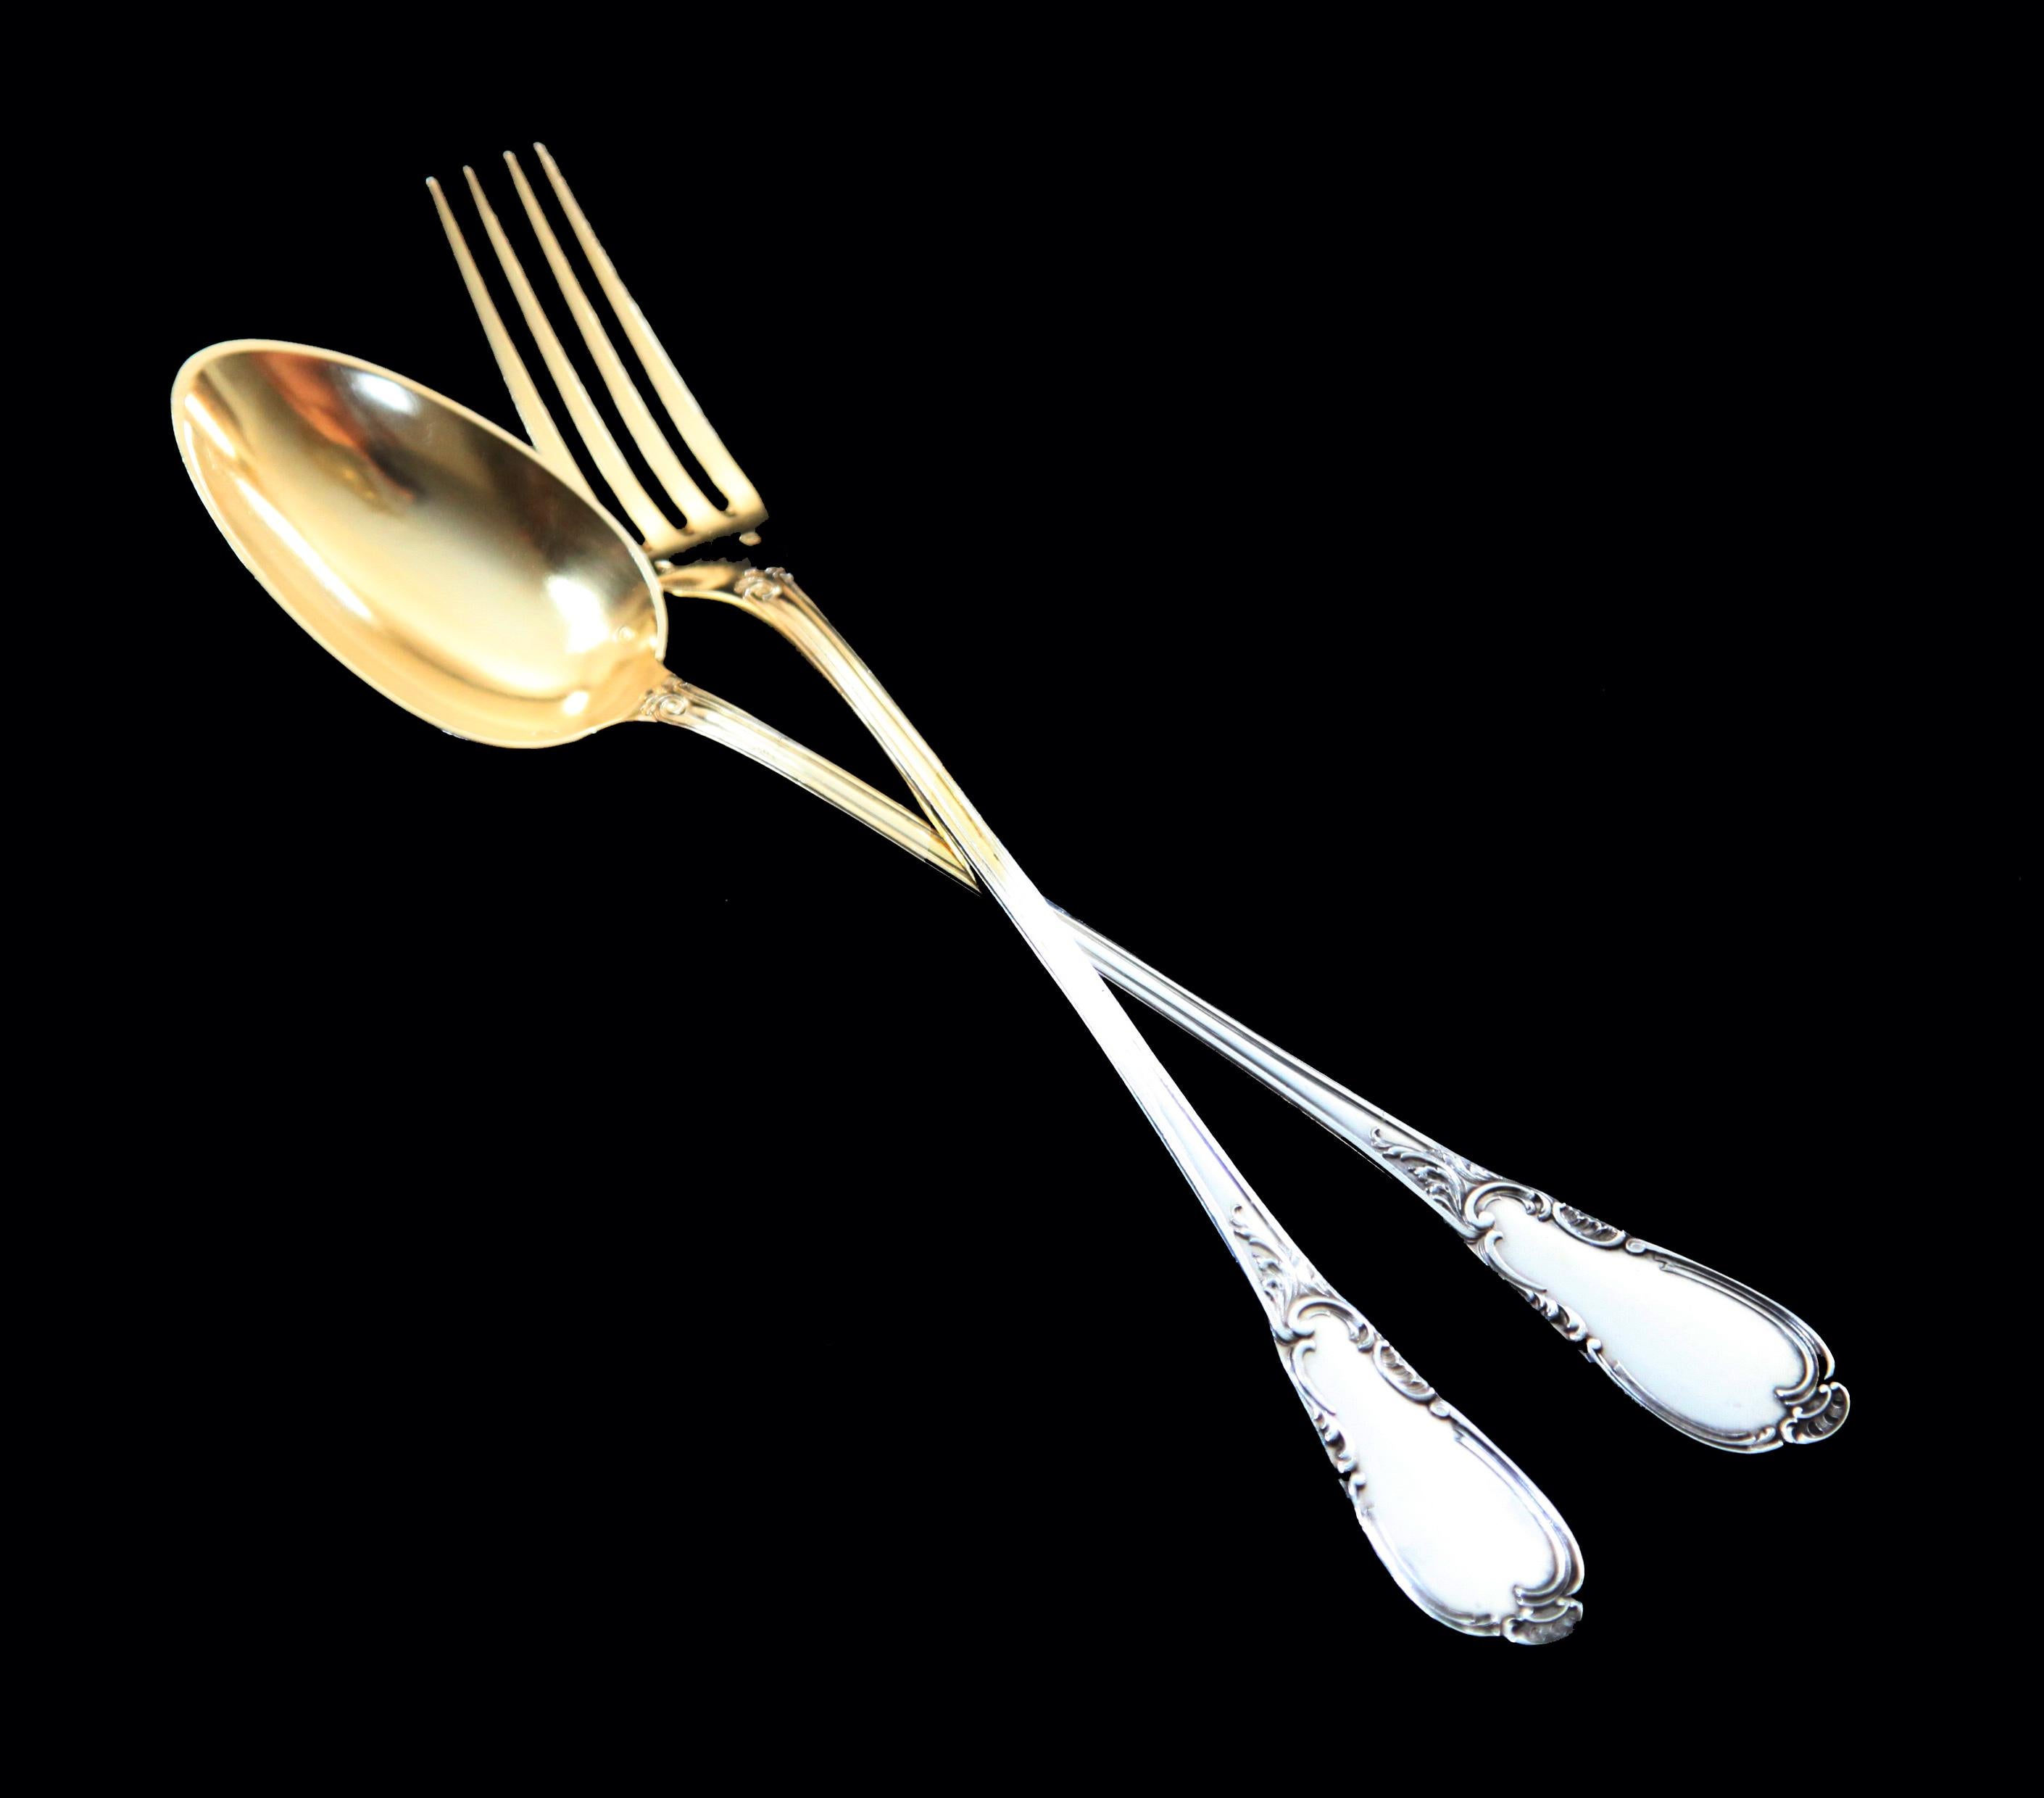 Direct from Paris, a Magnificent Set of 20 Louis XVI Flatware Serving Pieces in French 950 Sterling Silver by Internationally Known French Silversmith 